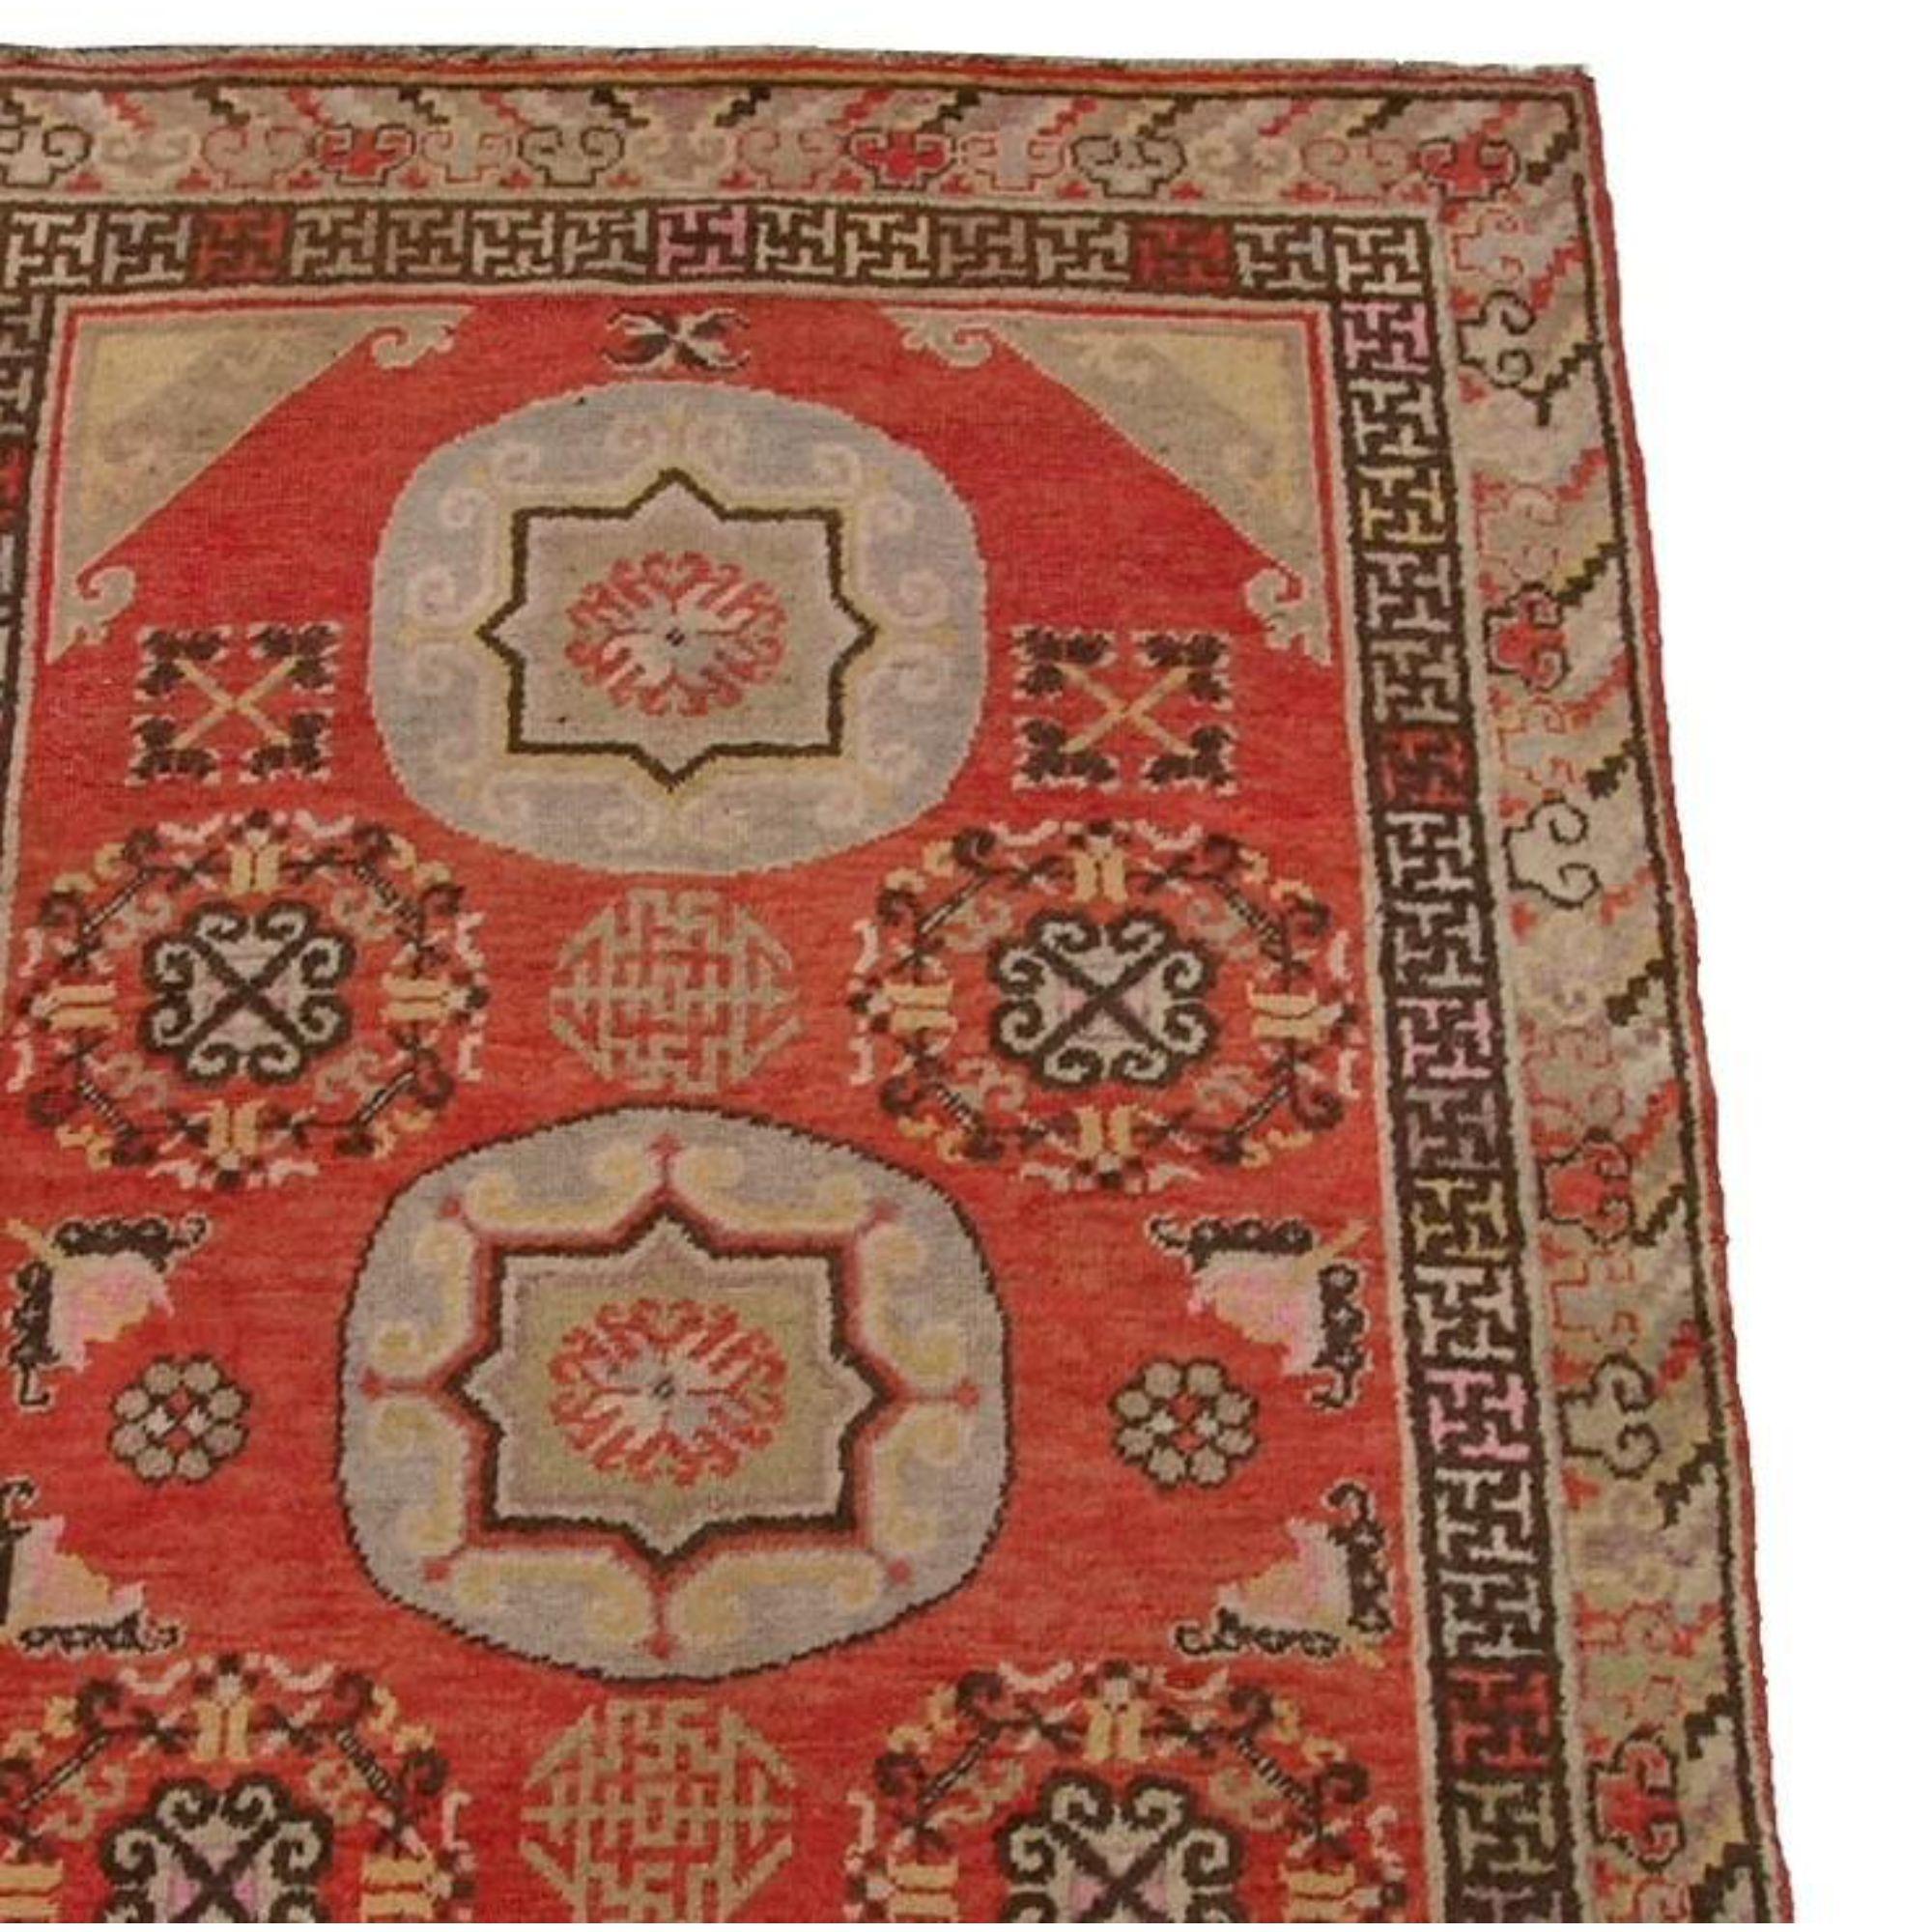 Antique Samarkand Tribe Rug 7'5'' X 4'1'', authentic and vintage design, wool on cotton foundation